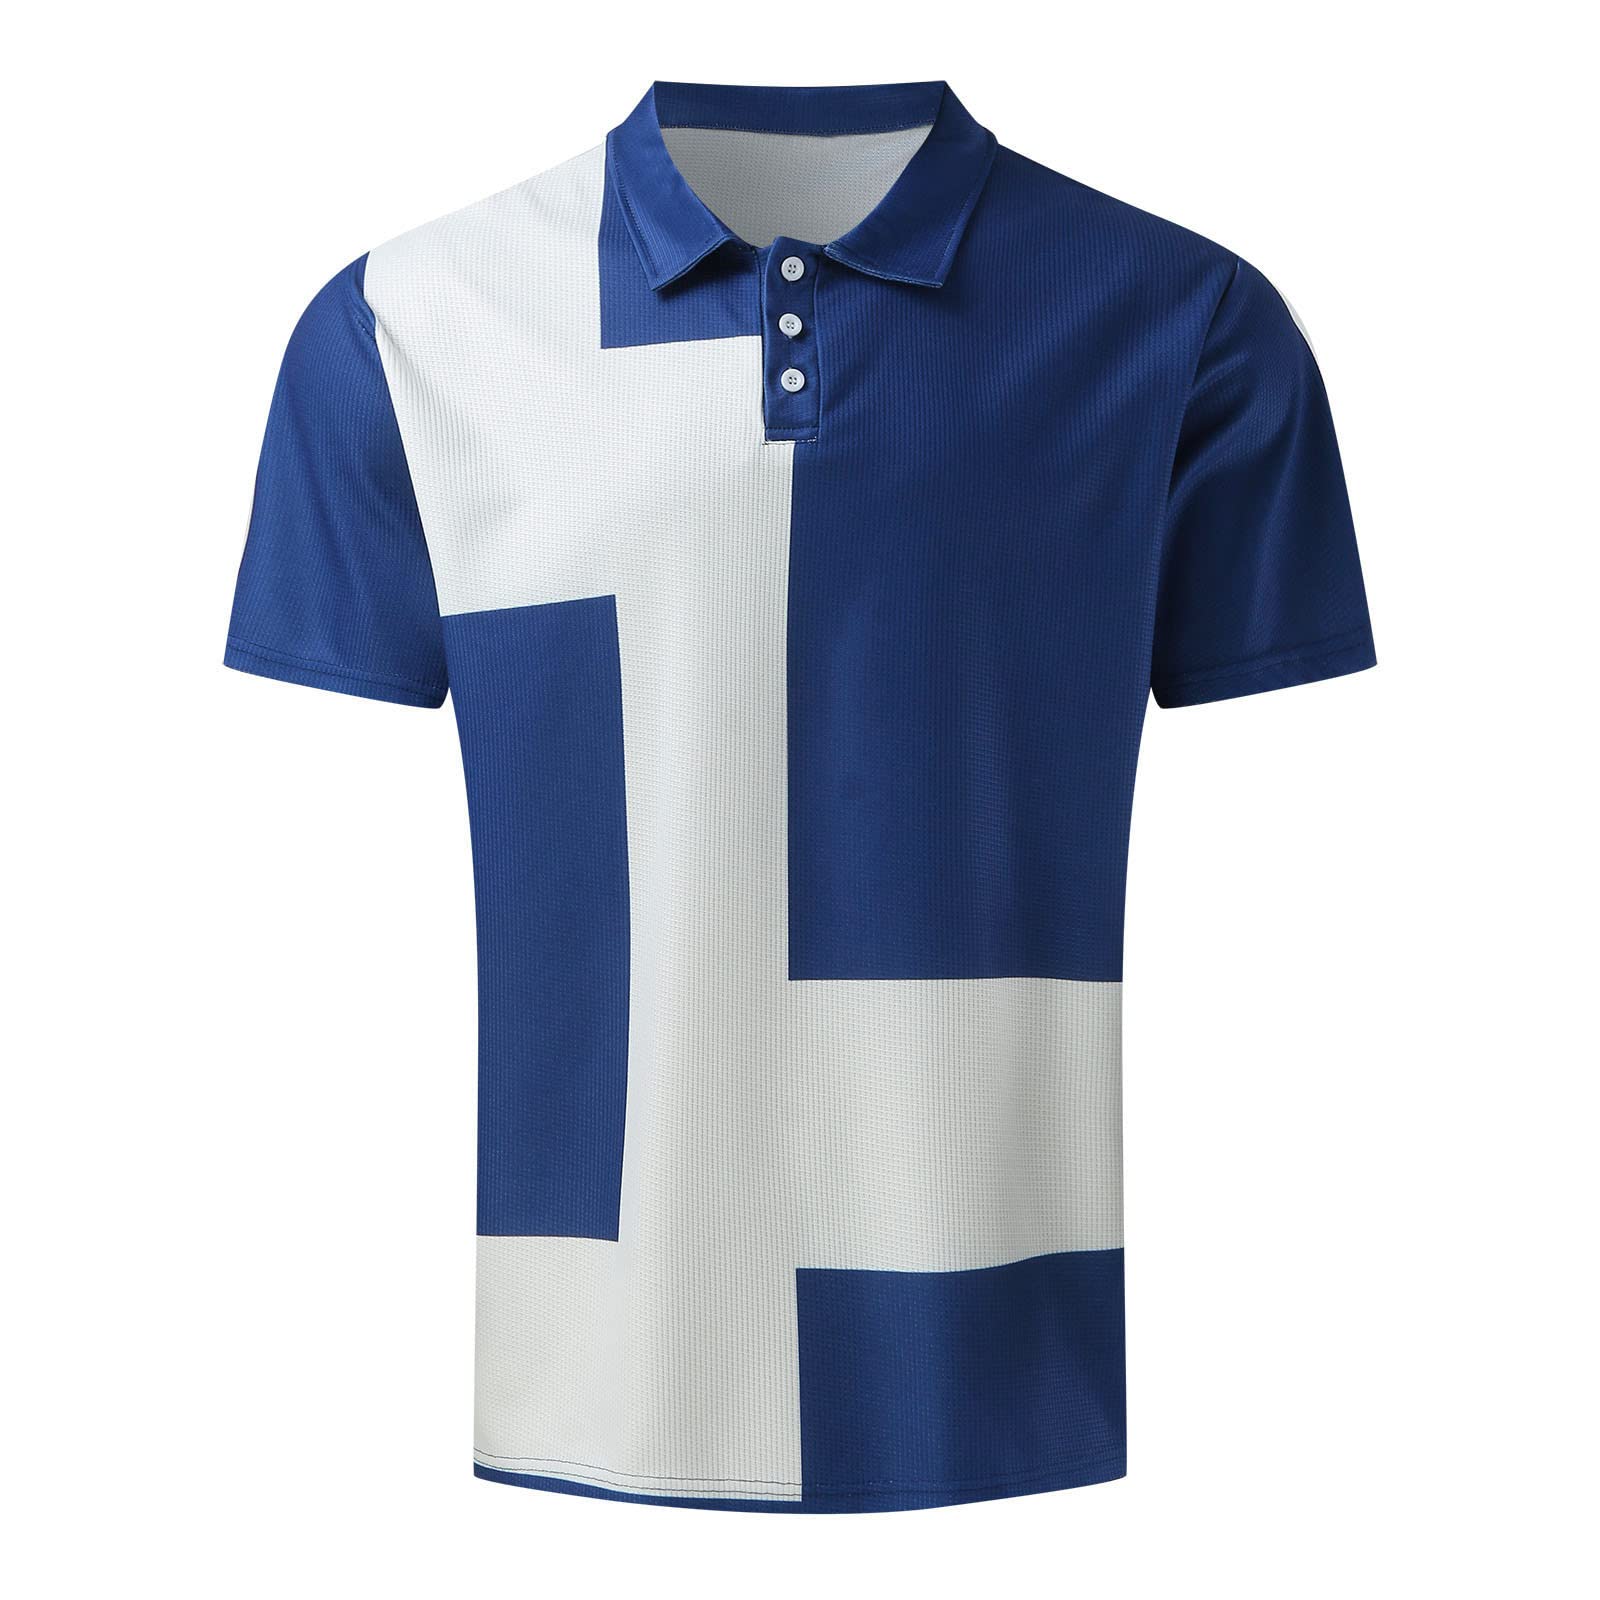 Mens Colorblock Golf Shirt Casual Short Sleeve Polo Shirts Slim Fit Workout Tee Summer Tops for Men Athletic Pullover